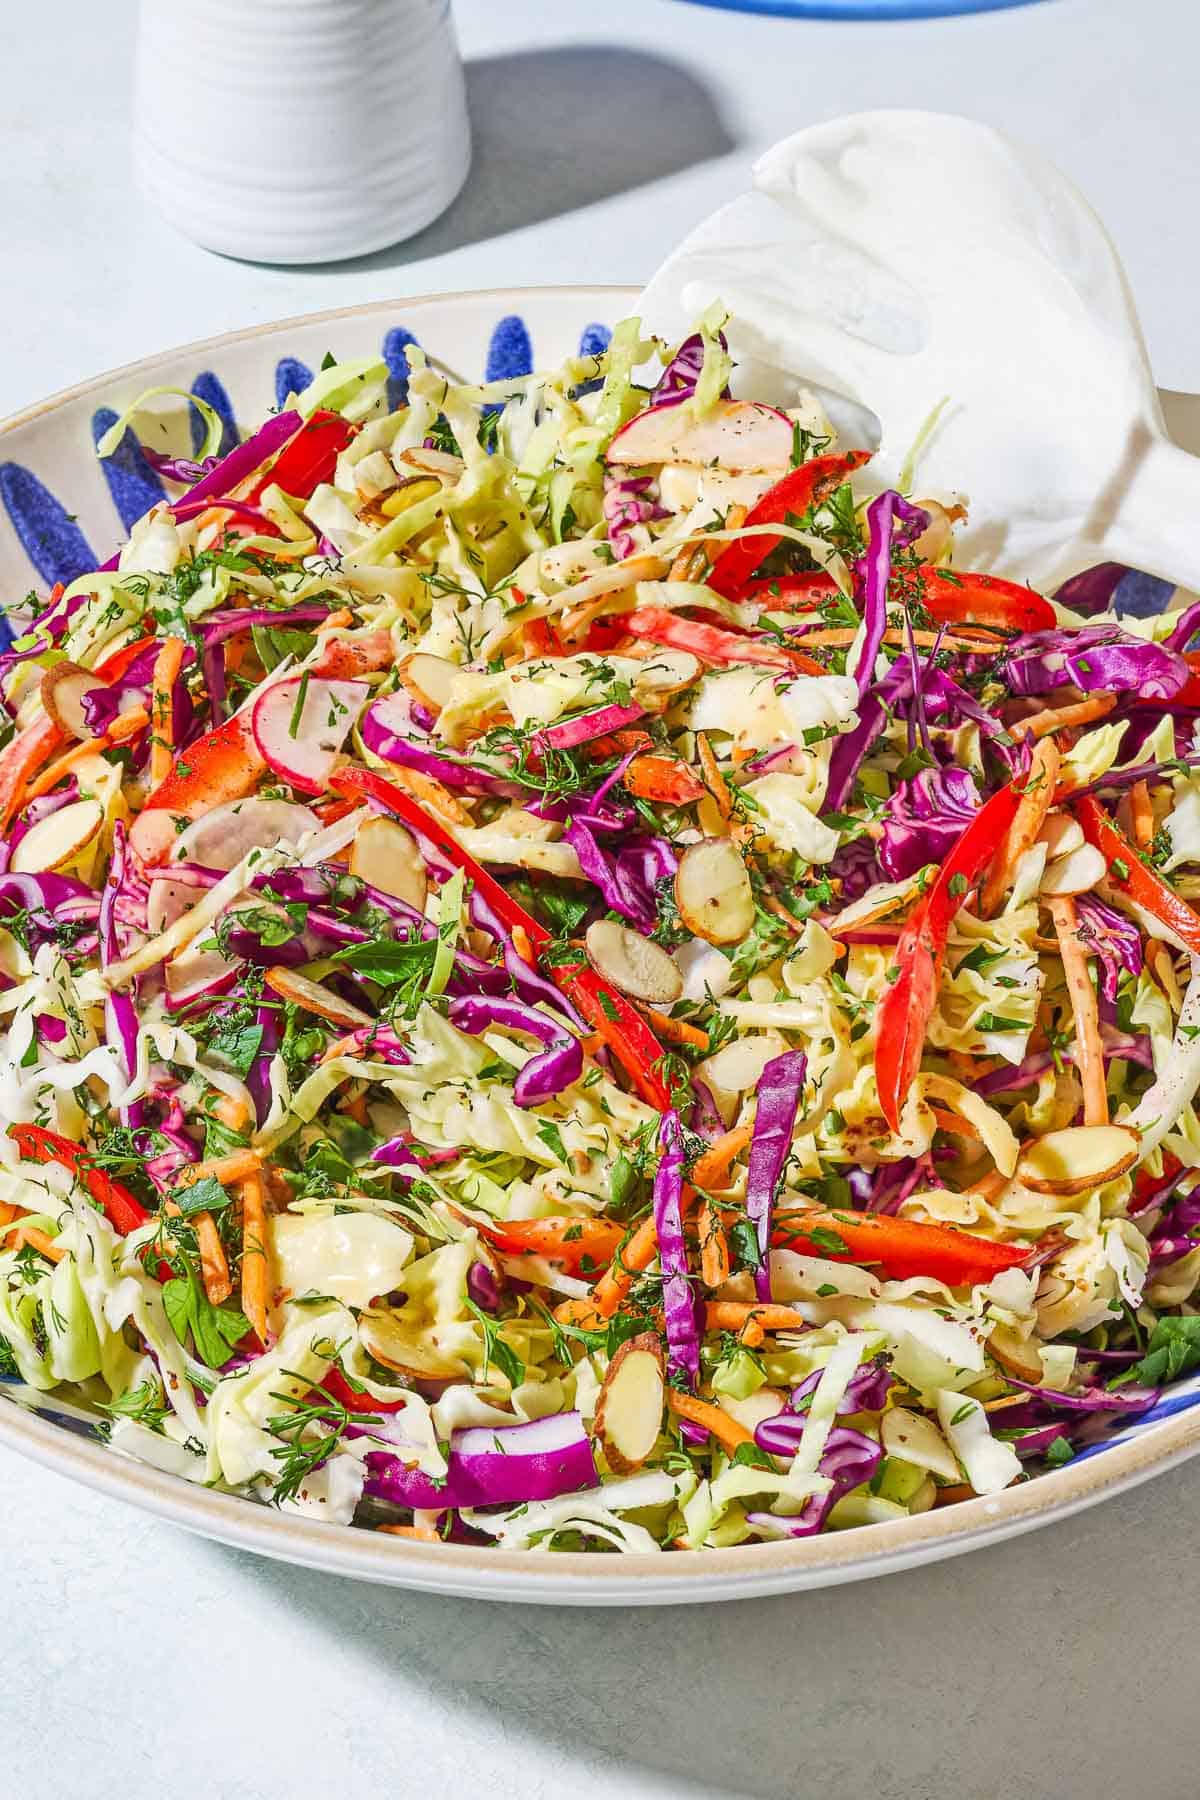 A close up of cabbage salad in a serving bowl with serving utensils.